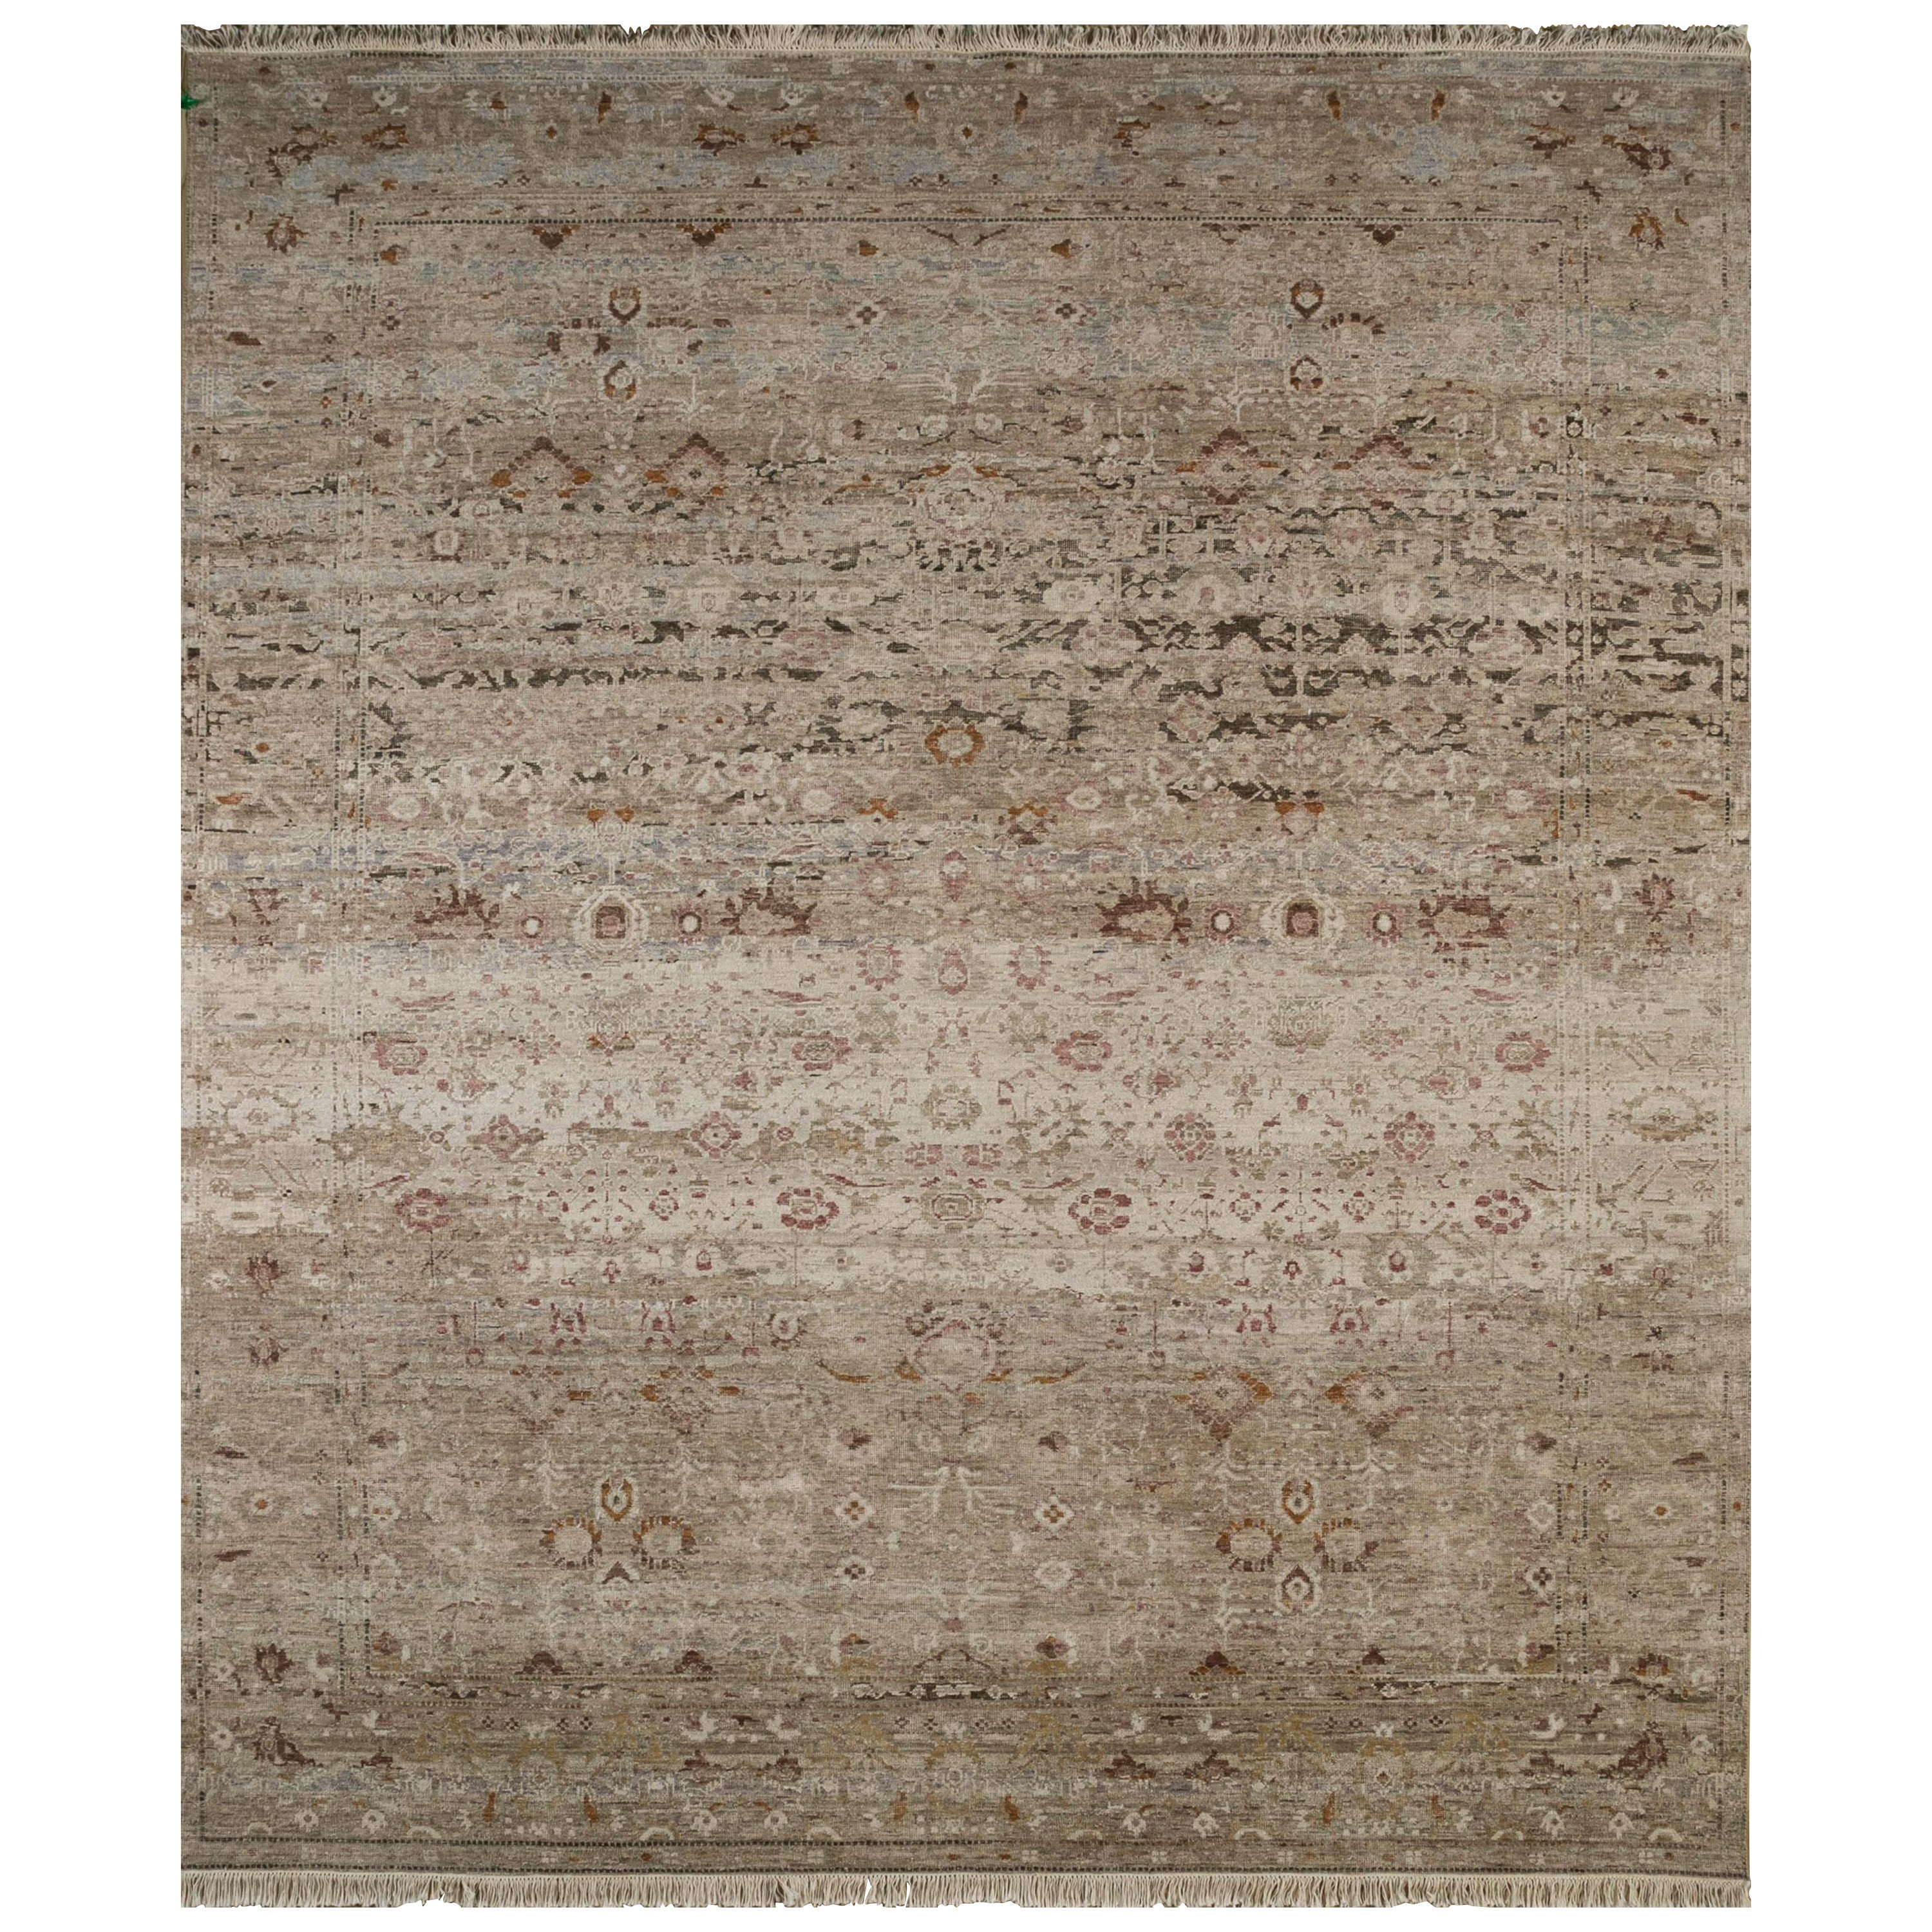 Enigmatic Weavings Clay & Soft Beige 240x300 cm Handknotted Rug For Sale